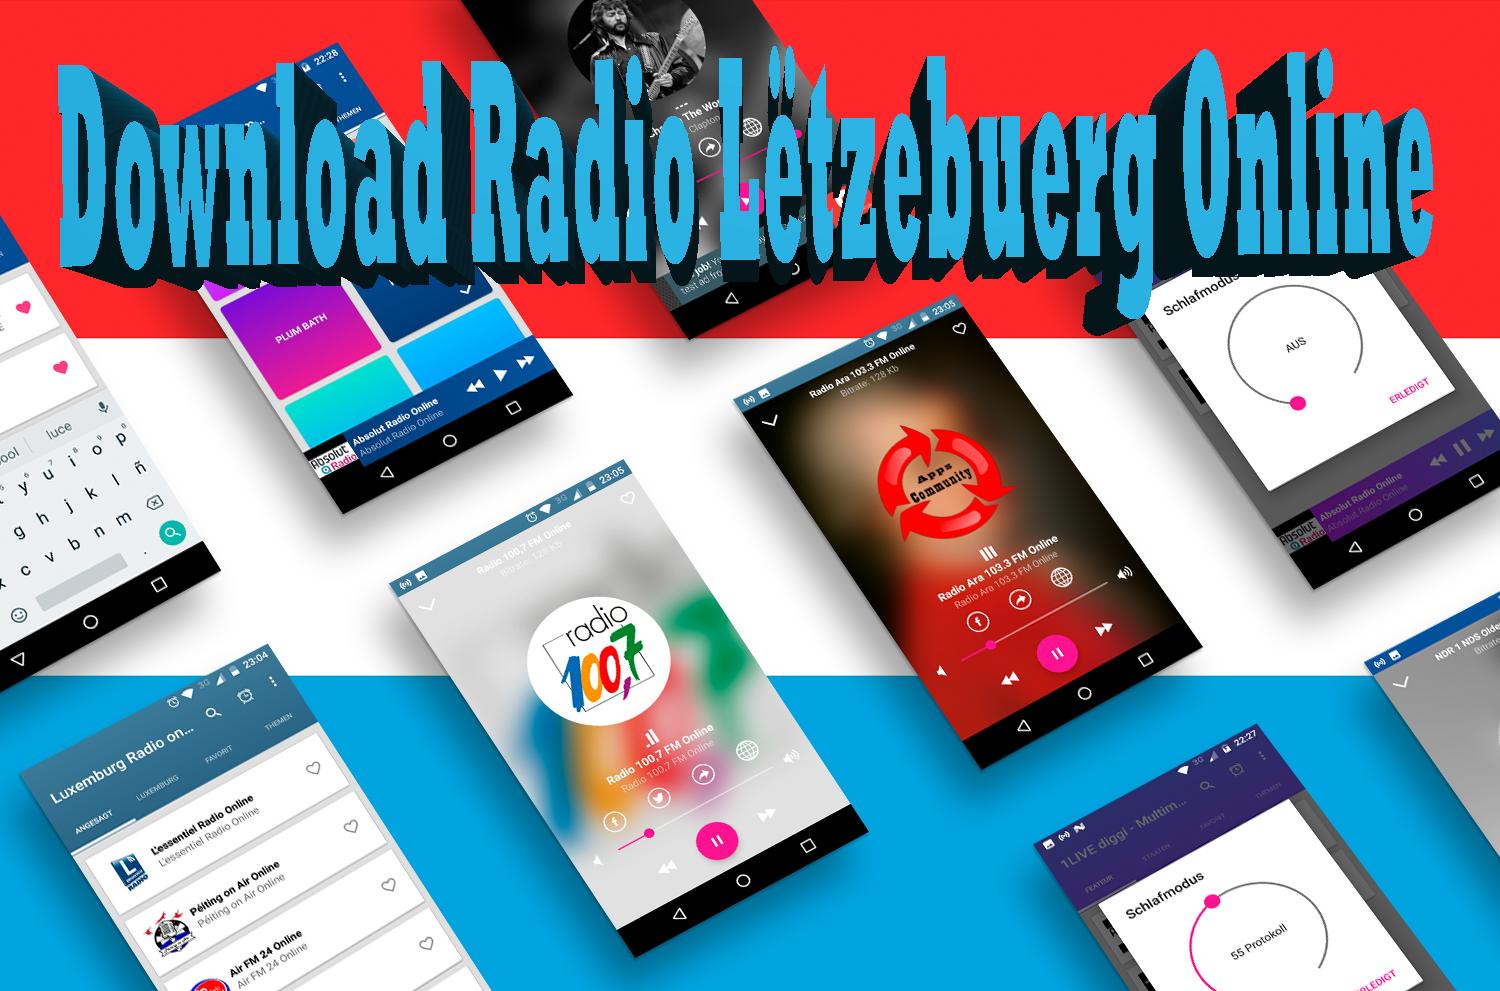 Radio Gutt Laun 106.0 FM On-line for Android - APK Download